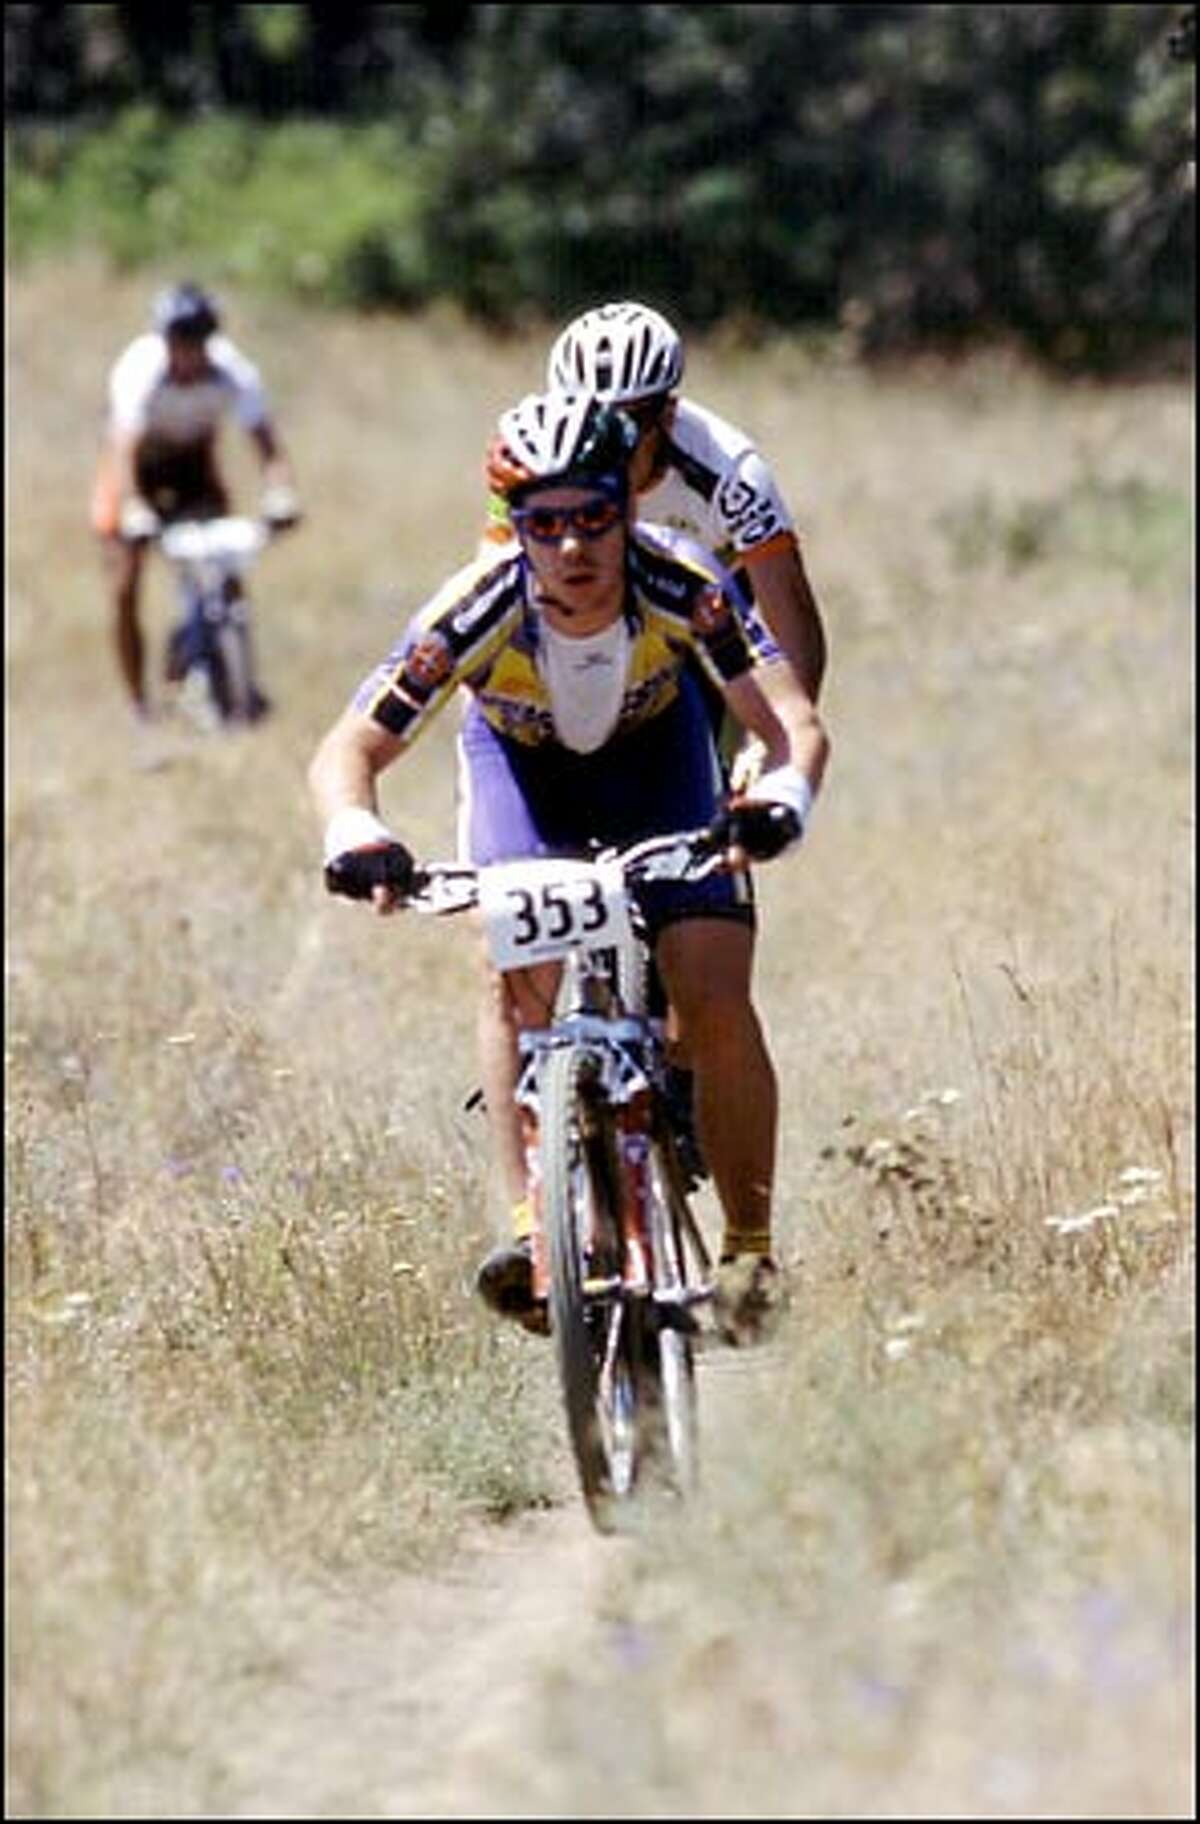 The 24-hour mountain bike race expects about 300 riders.